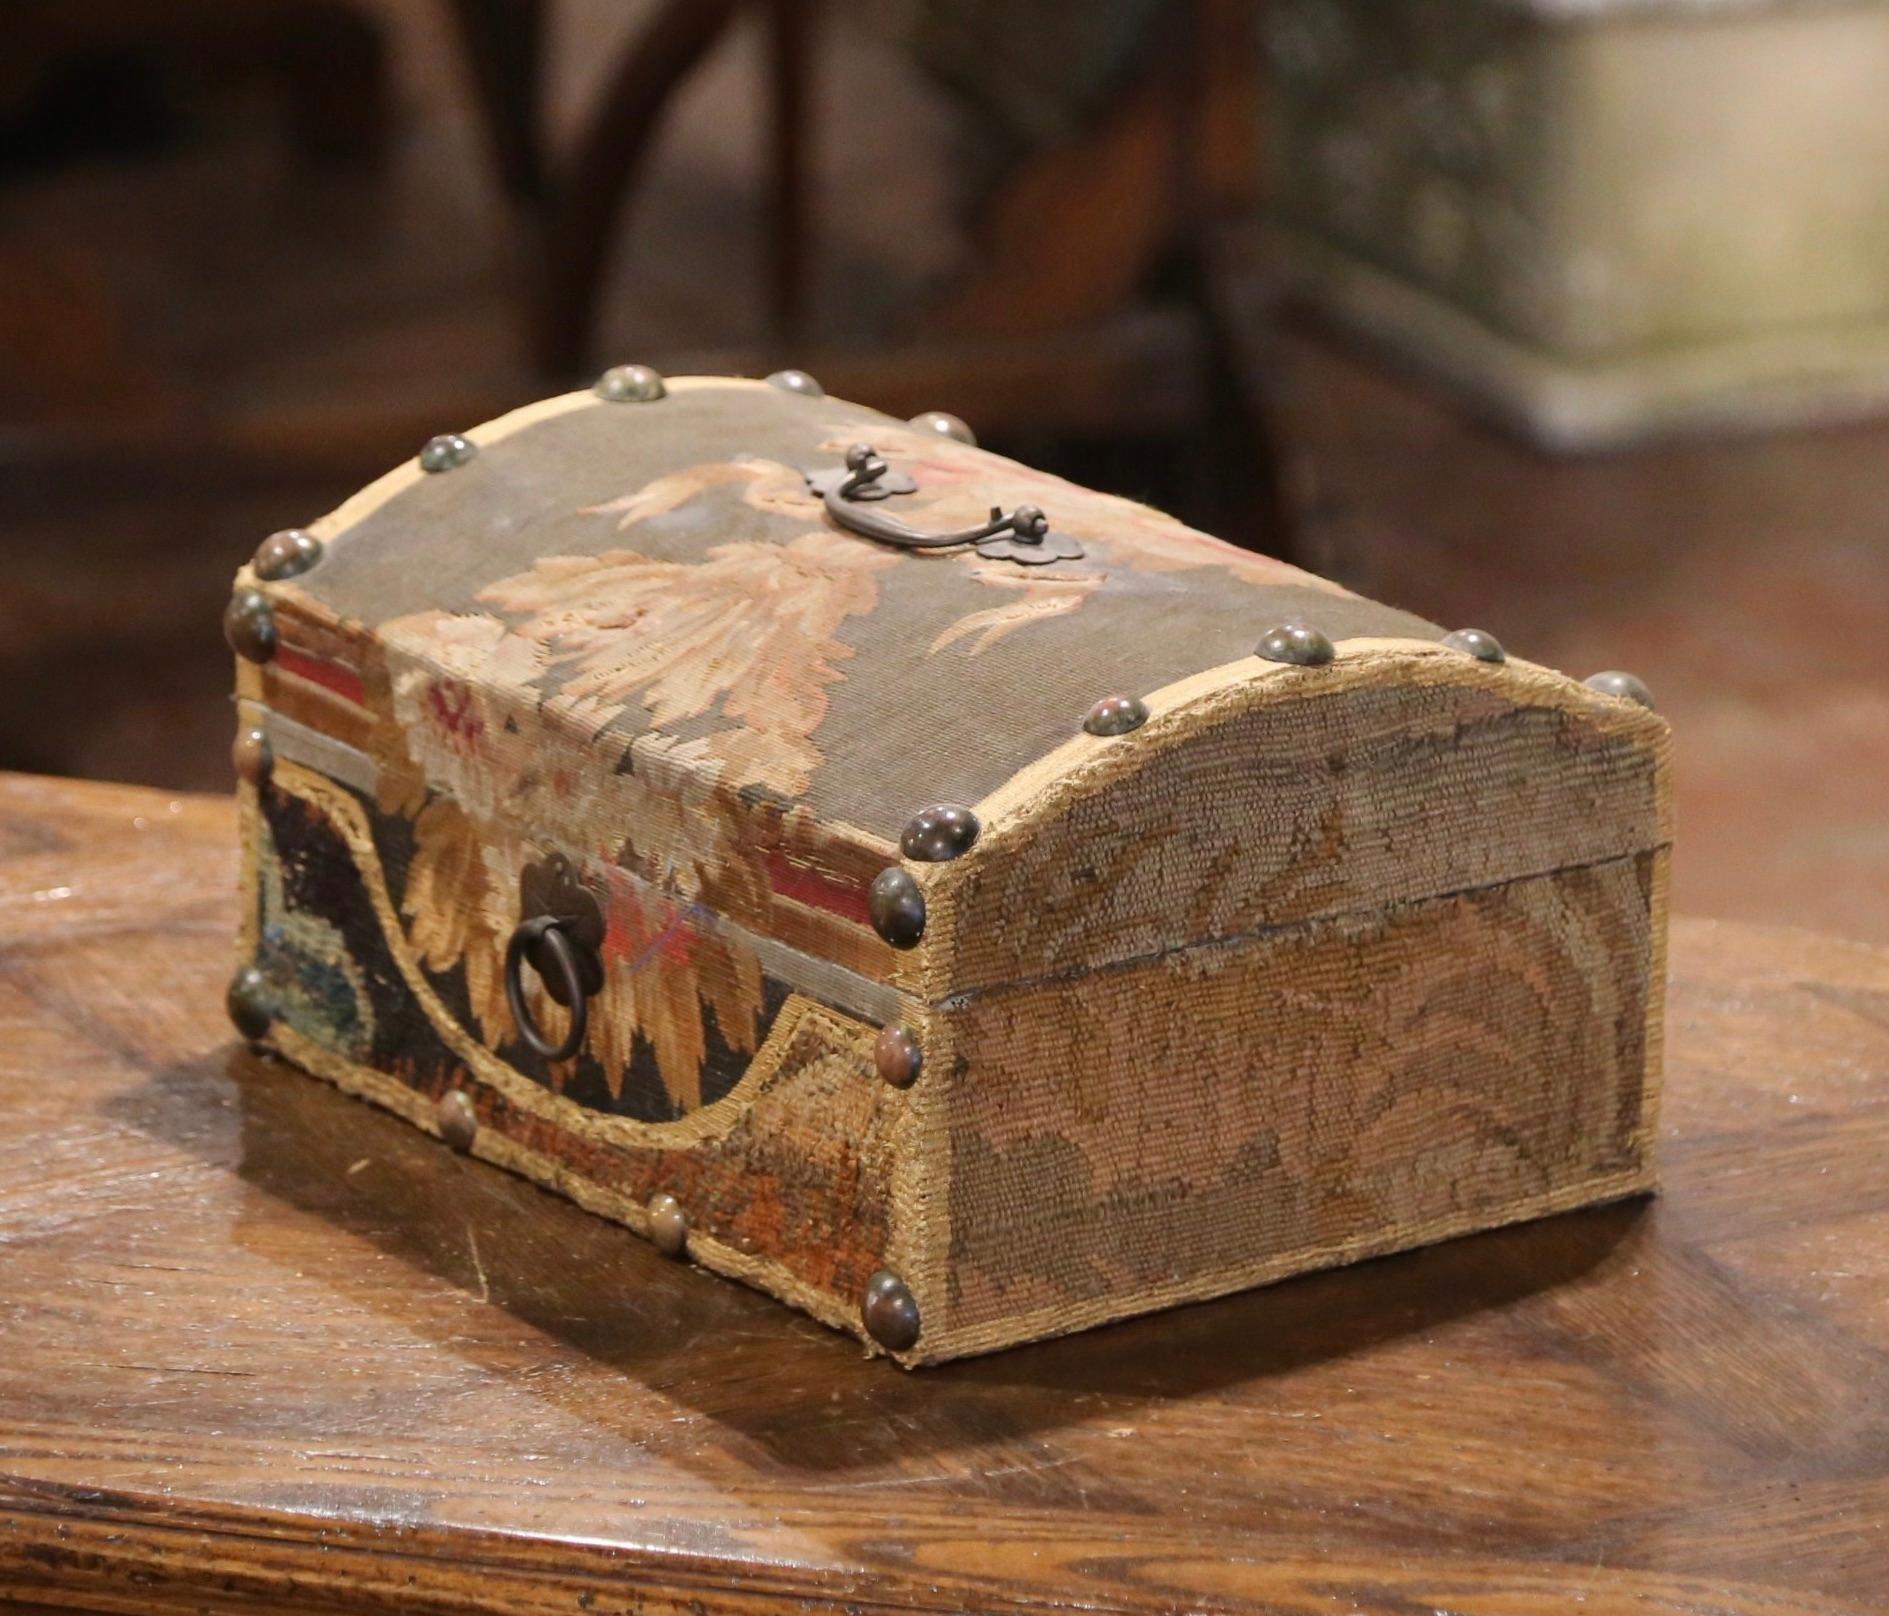 Place this decorative box on a coffee table to store your remote controls, or display it on a shelf. The box with bombe top, is upholstered with antique Aubusson verdure fragments and embellished with brass nailheads and a top handle. The colorful